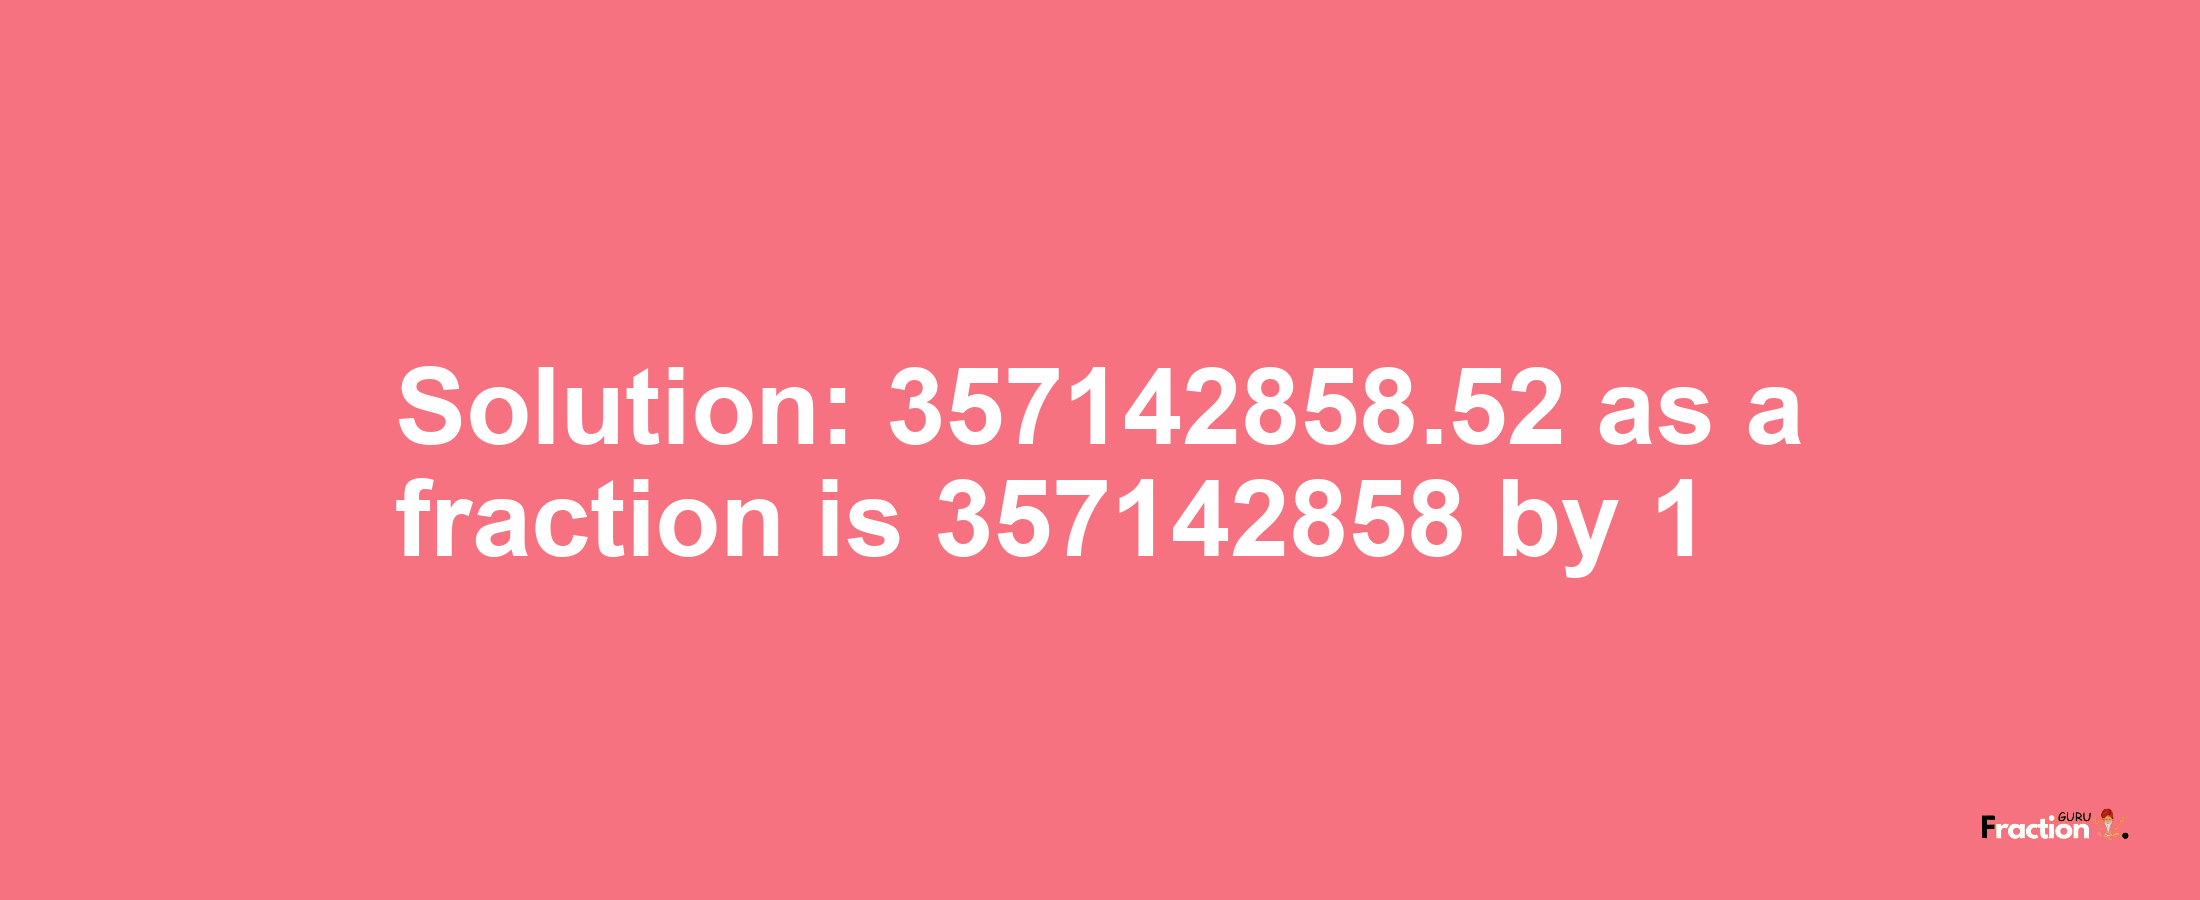 Solution:357142858.52 as a fraction is 357142858/1